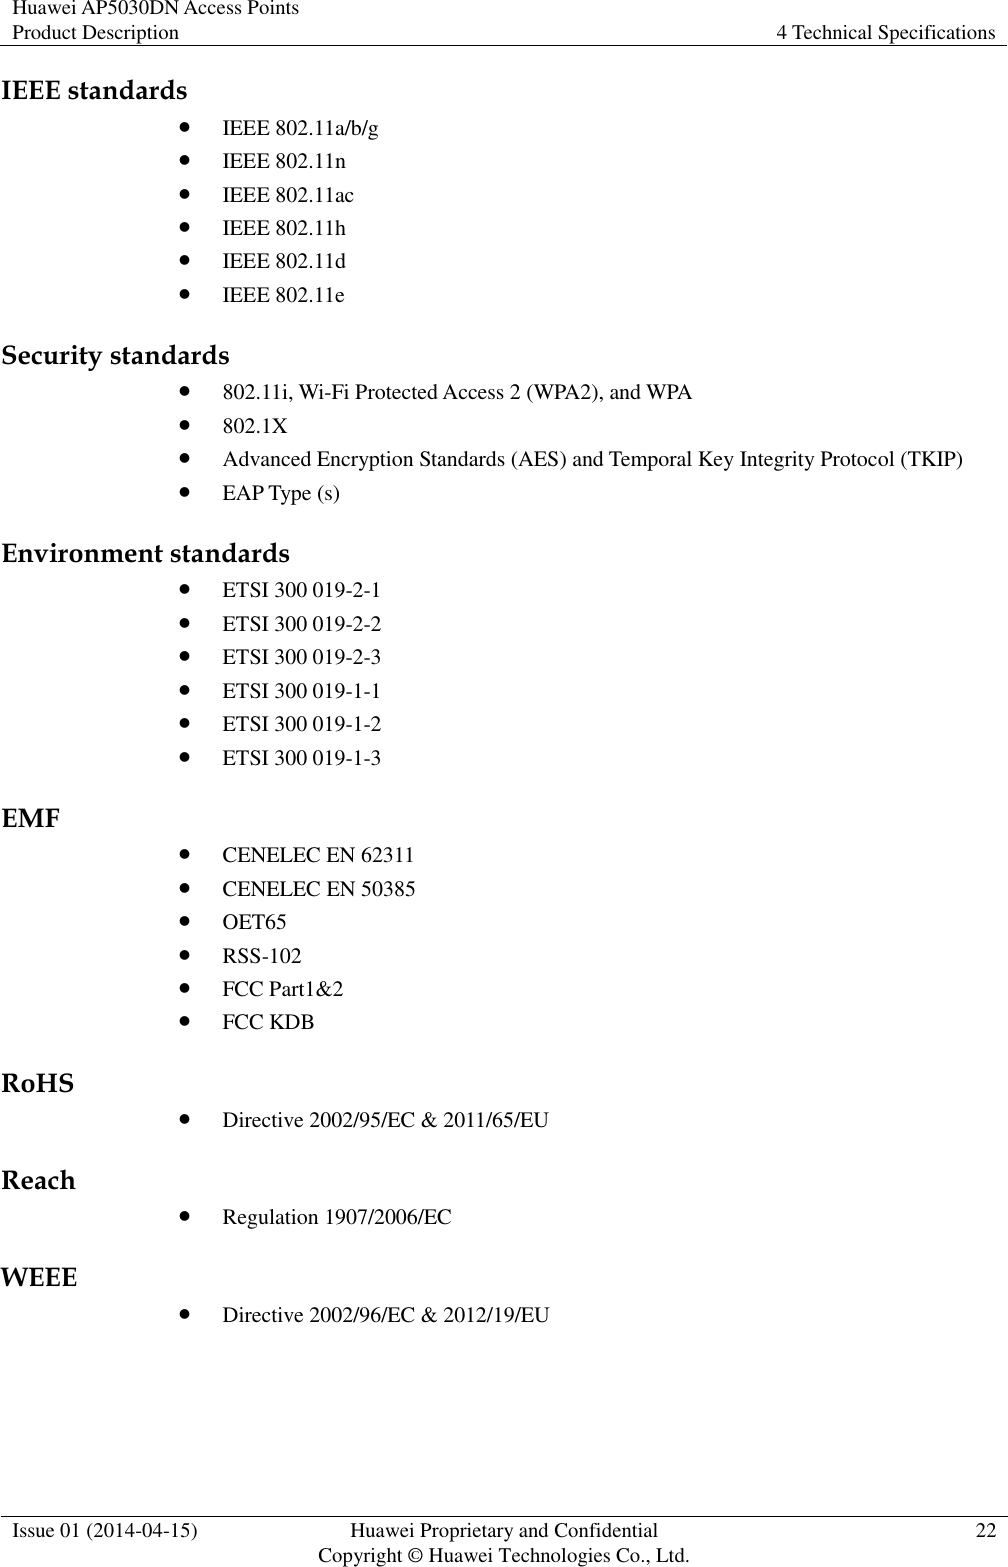 Huawei AP5030DN Access Points Product Description 4 Technical Specifications  Issue 01 (2014-04-15) Huawei Proprietary and Confidential                                     Copyright © Huawei Technologies Co., Ltd. 22  IEEE standards  IEEE 802.11a/b/g  IEEE 802.11n  IEEE 802.11ac  IEEE 802.11h  IEEE 802.11d  IEEE 802.11e Security standards  802.11i, Wi-Fi Protected Access 2 (WPA2), and WPA  802.1X  Advanced Encryption Standards (AES) and Temporal Key Integrity Protocol (TKIP)  EAP Type (s) Environment standards  ETSI 300 019-2-1  ETSI 300 019-2-2  ETSI 300 019-2-3  ETSI 300 019-1-1  ETSI 300 019-1-2  ETSI 300 019-1-3 EMF  CENELEC EN 62311  CENELEC EN 50385  OET65  RSS-102  FCC Part1&amp;2  FCC KDB RoHS  Directive 2002/95/EC &amp; 2011/65/EU Reach  Regulation 1907/2006/EC WEEE  Directive 2002/96/EC &amp; 2012/19/EU 